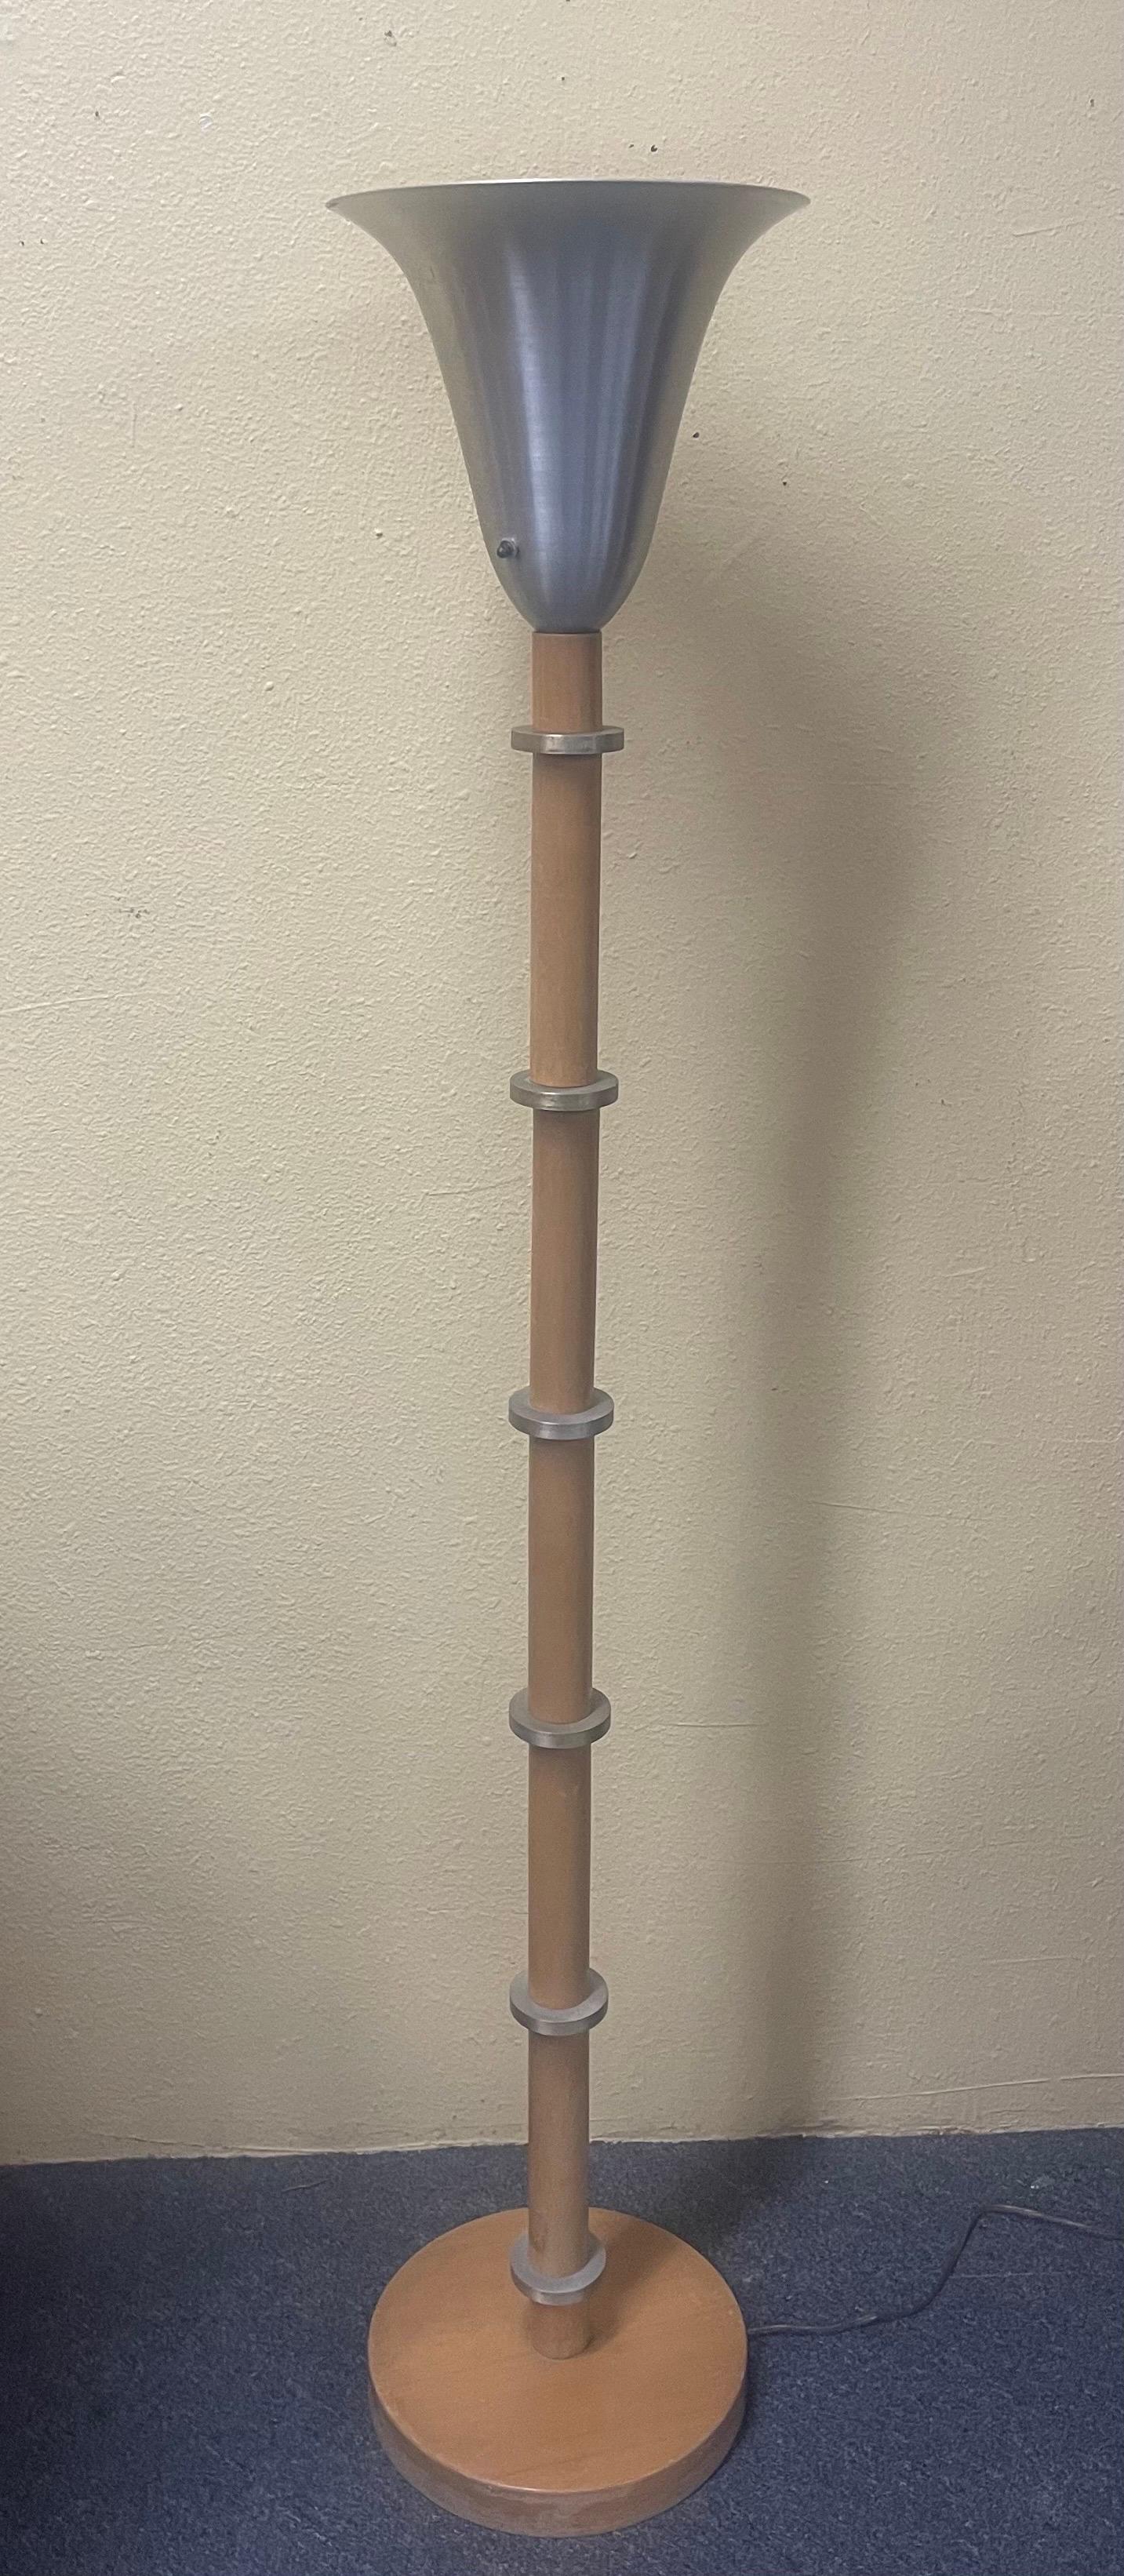 Art Deco Hardrock Maple & Spun Aluminum Torchère Floor Lamp by Russel Wright In Good Condition For Sale In San Diego, CA